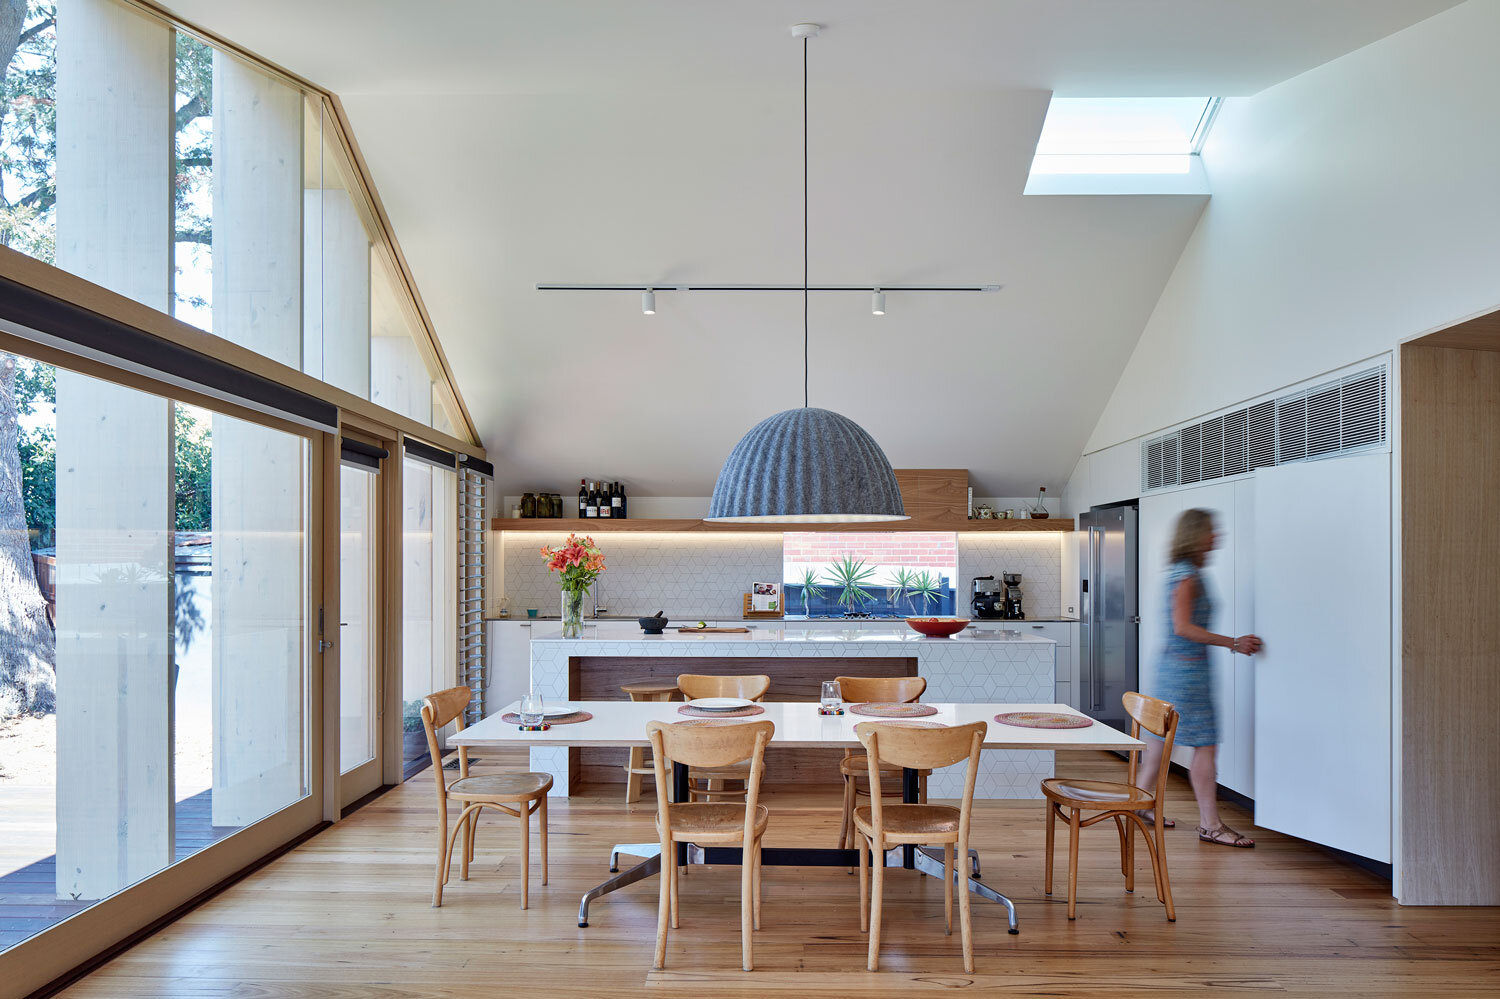 lean-to-house-oakleigh-melbourne-renovation-by-warc-studio-architects-06.jpg